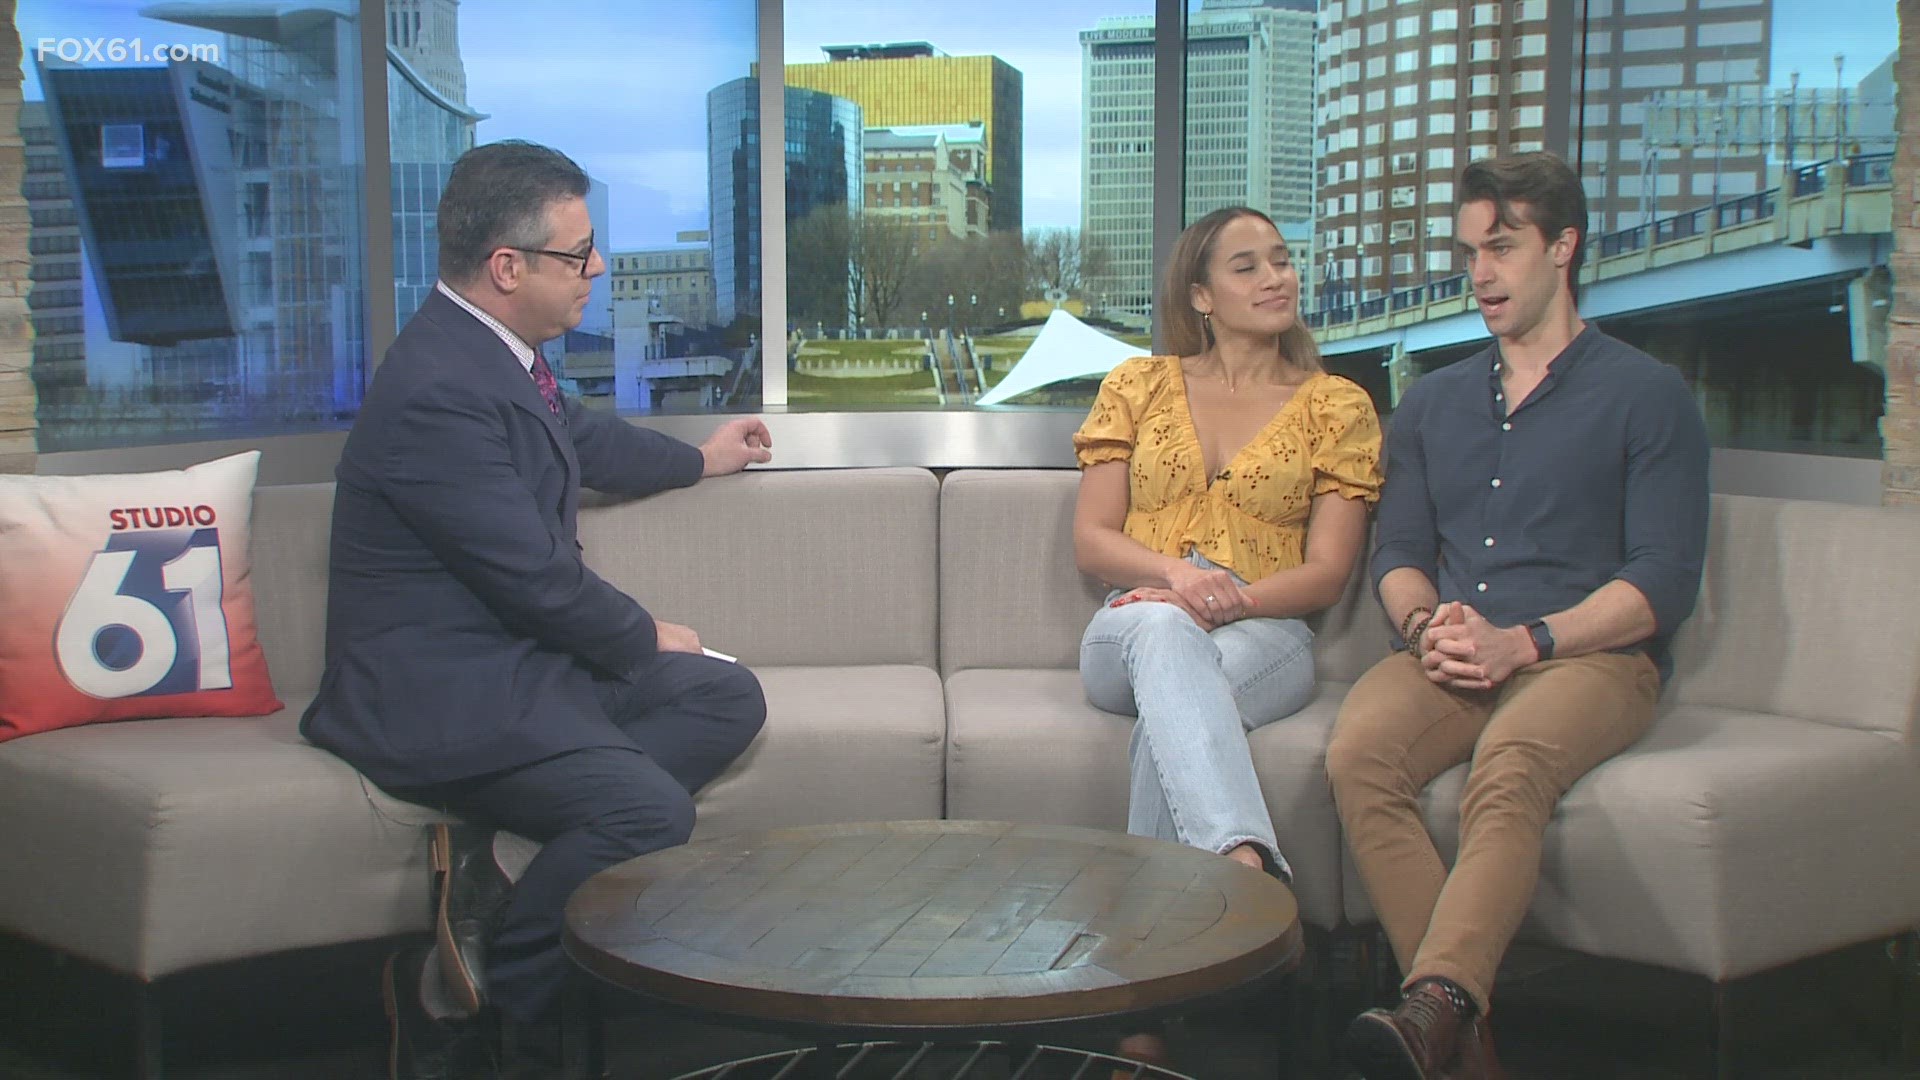 Some cast members of Moulin Rouge visit Studio61 to talk about the national tour and the show's stop at The Bushnell in Hartford.